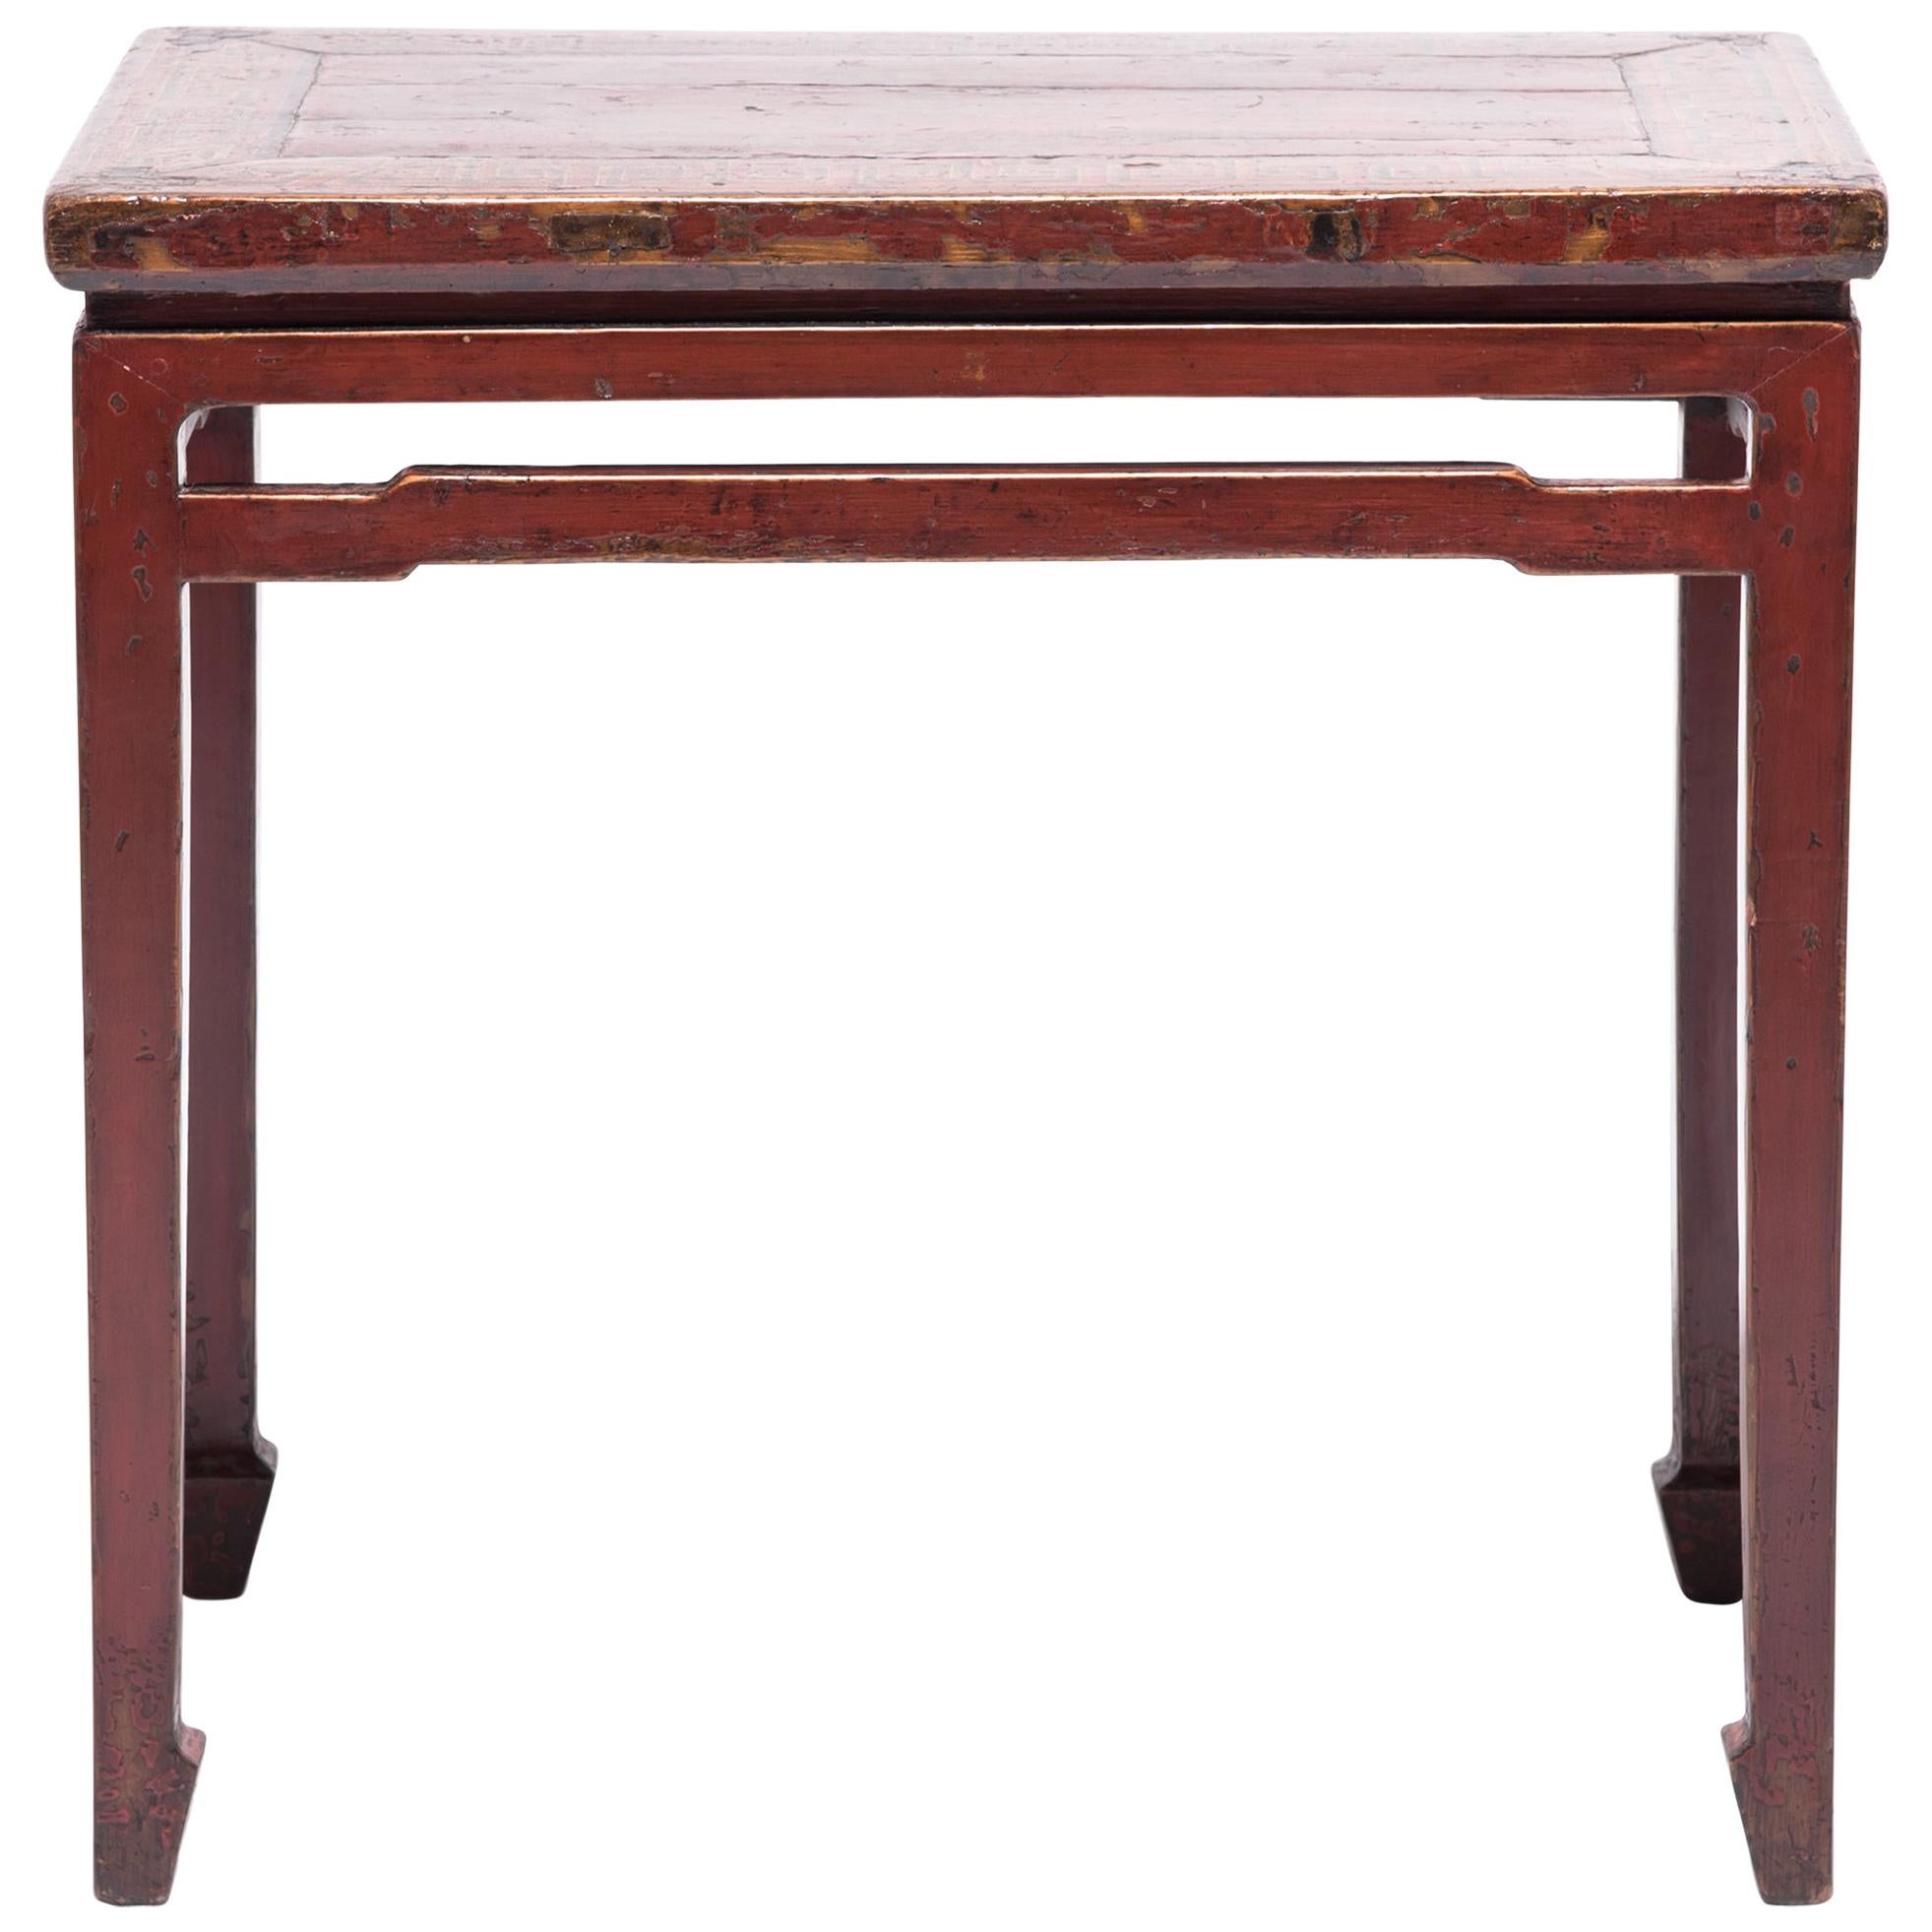 Chinese Scholarly Lacquered Offering Table, c. 1850